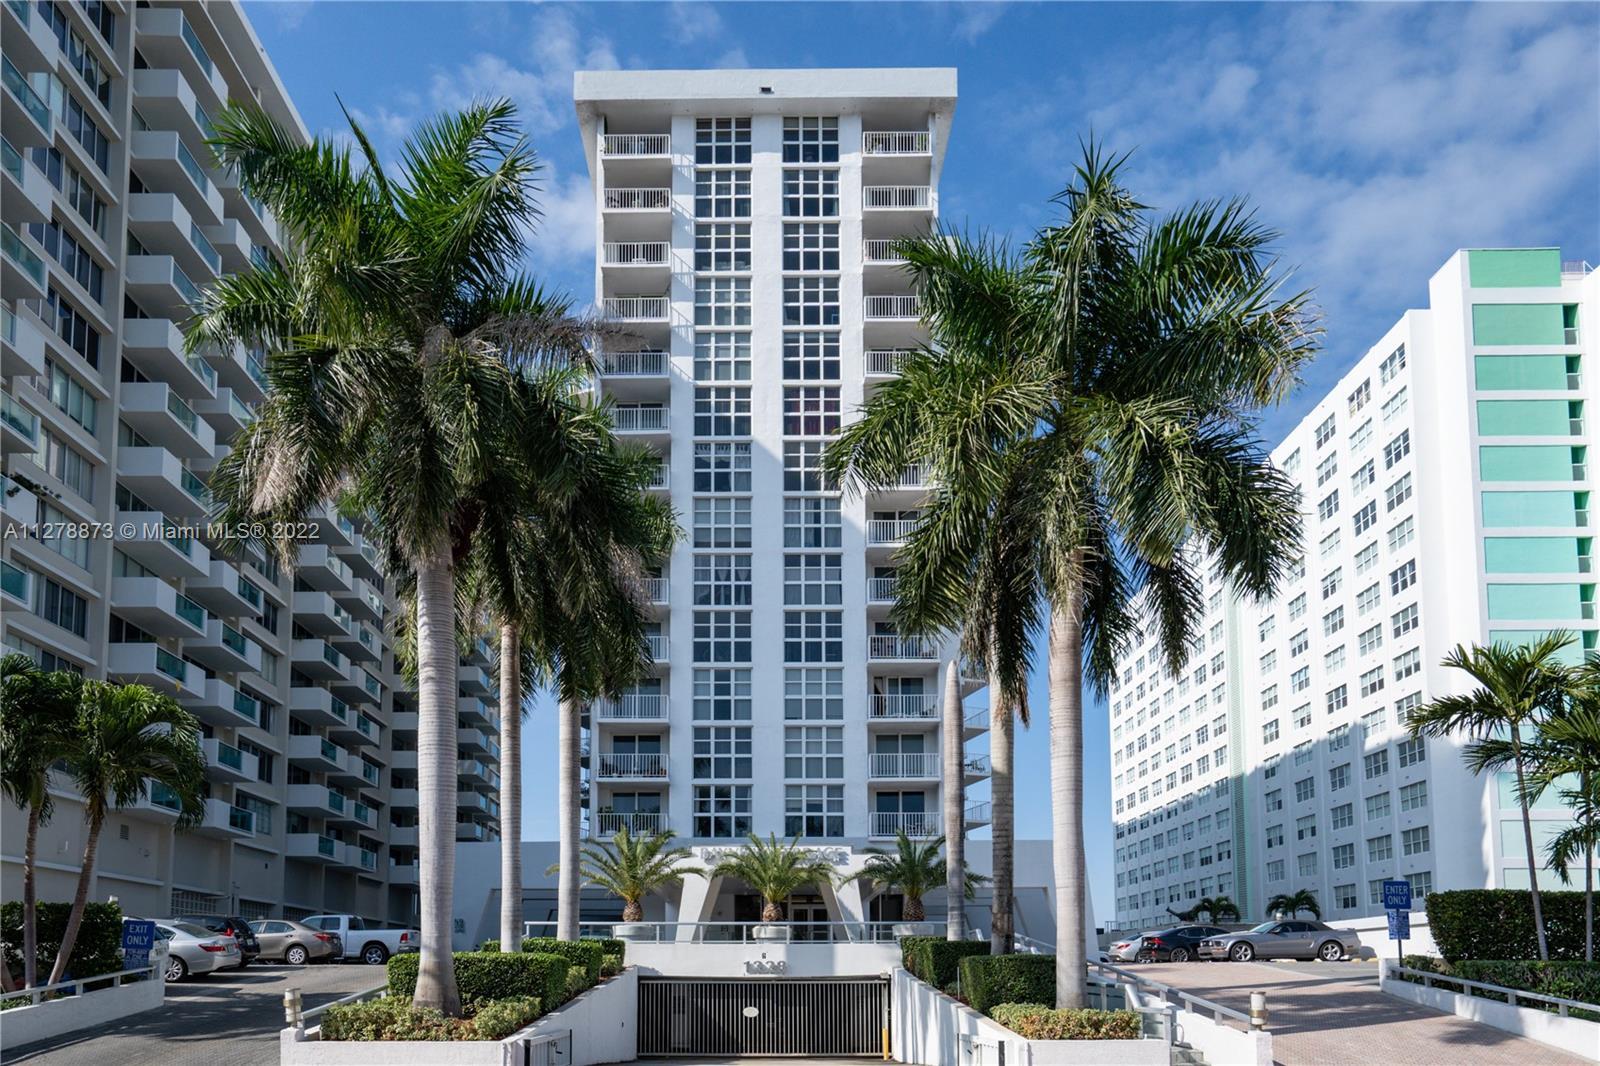 Unobstructed, panoramic views over South Beach in this highly sought-after 1 bed, 1.5 bath corner un